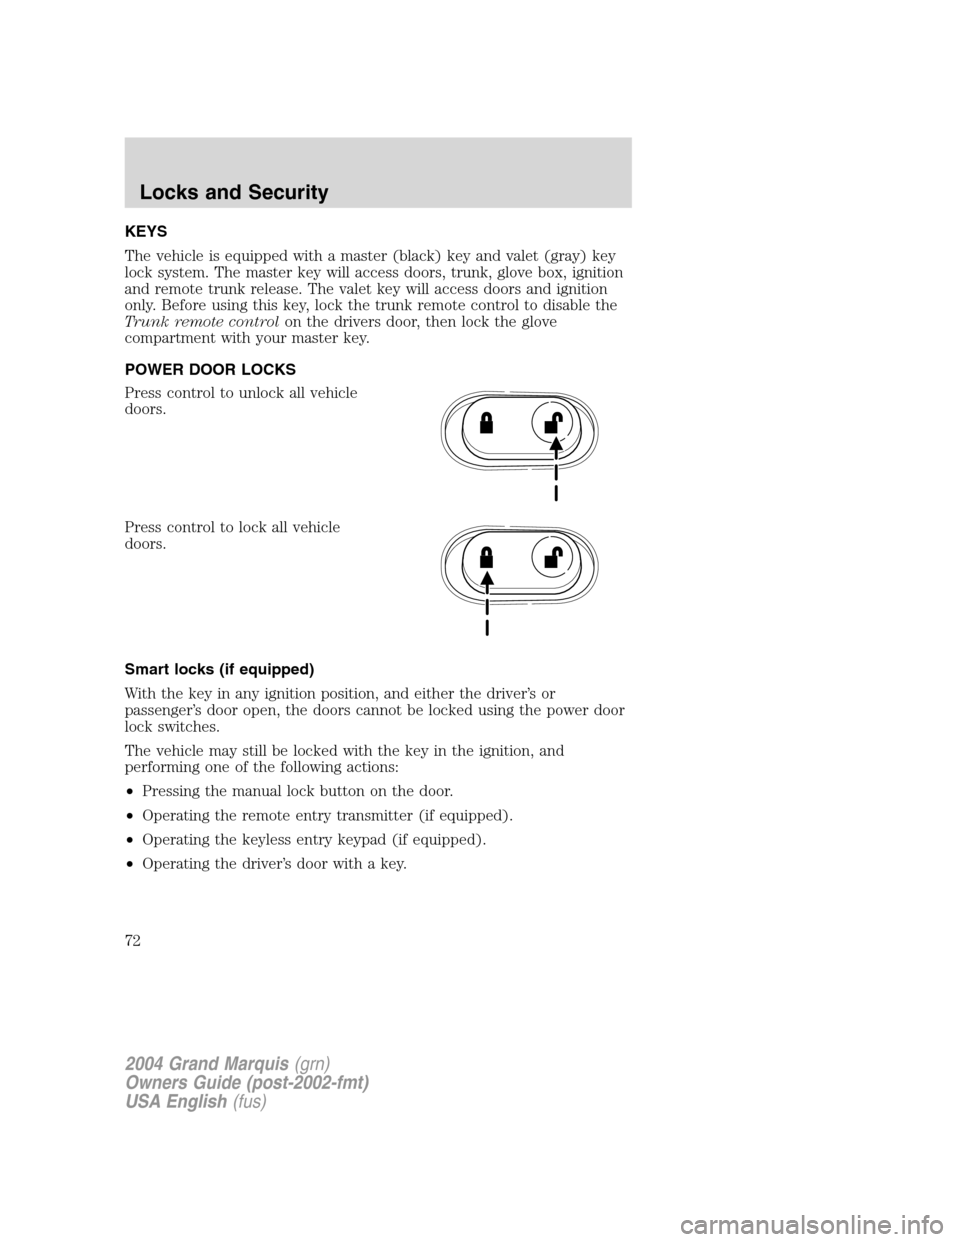 Mercury Grand Marquis 2004  s Manual PDF KEYS
The vehicle is equipped with a master (black) key and valet (gray) key
lock system. The master key will access doors, trunk, glove box, ignition
and remote trunk release. The valet key will acces